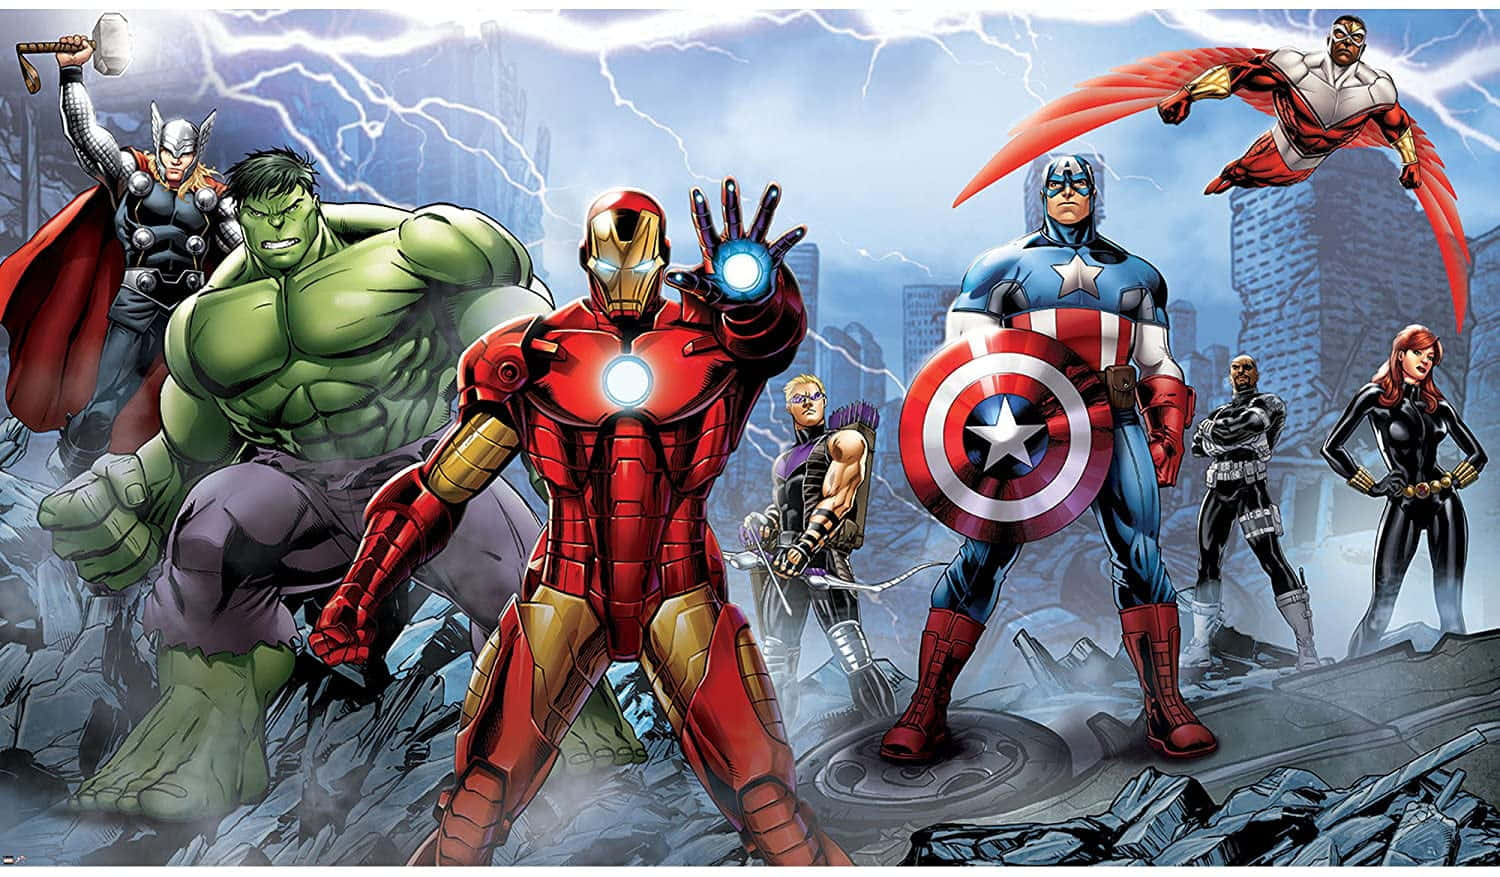 Dope Avengers Animated Series In Chaotic City Wallpaper